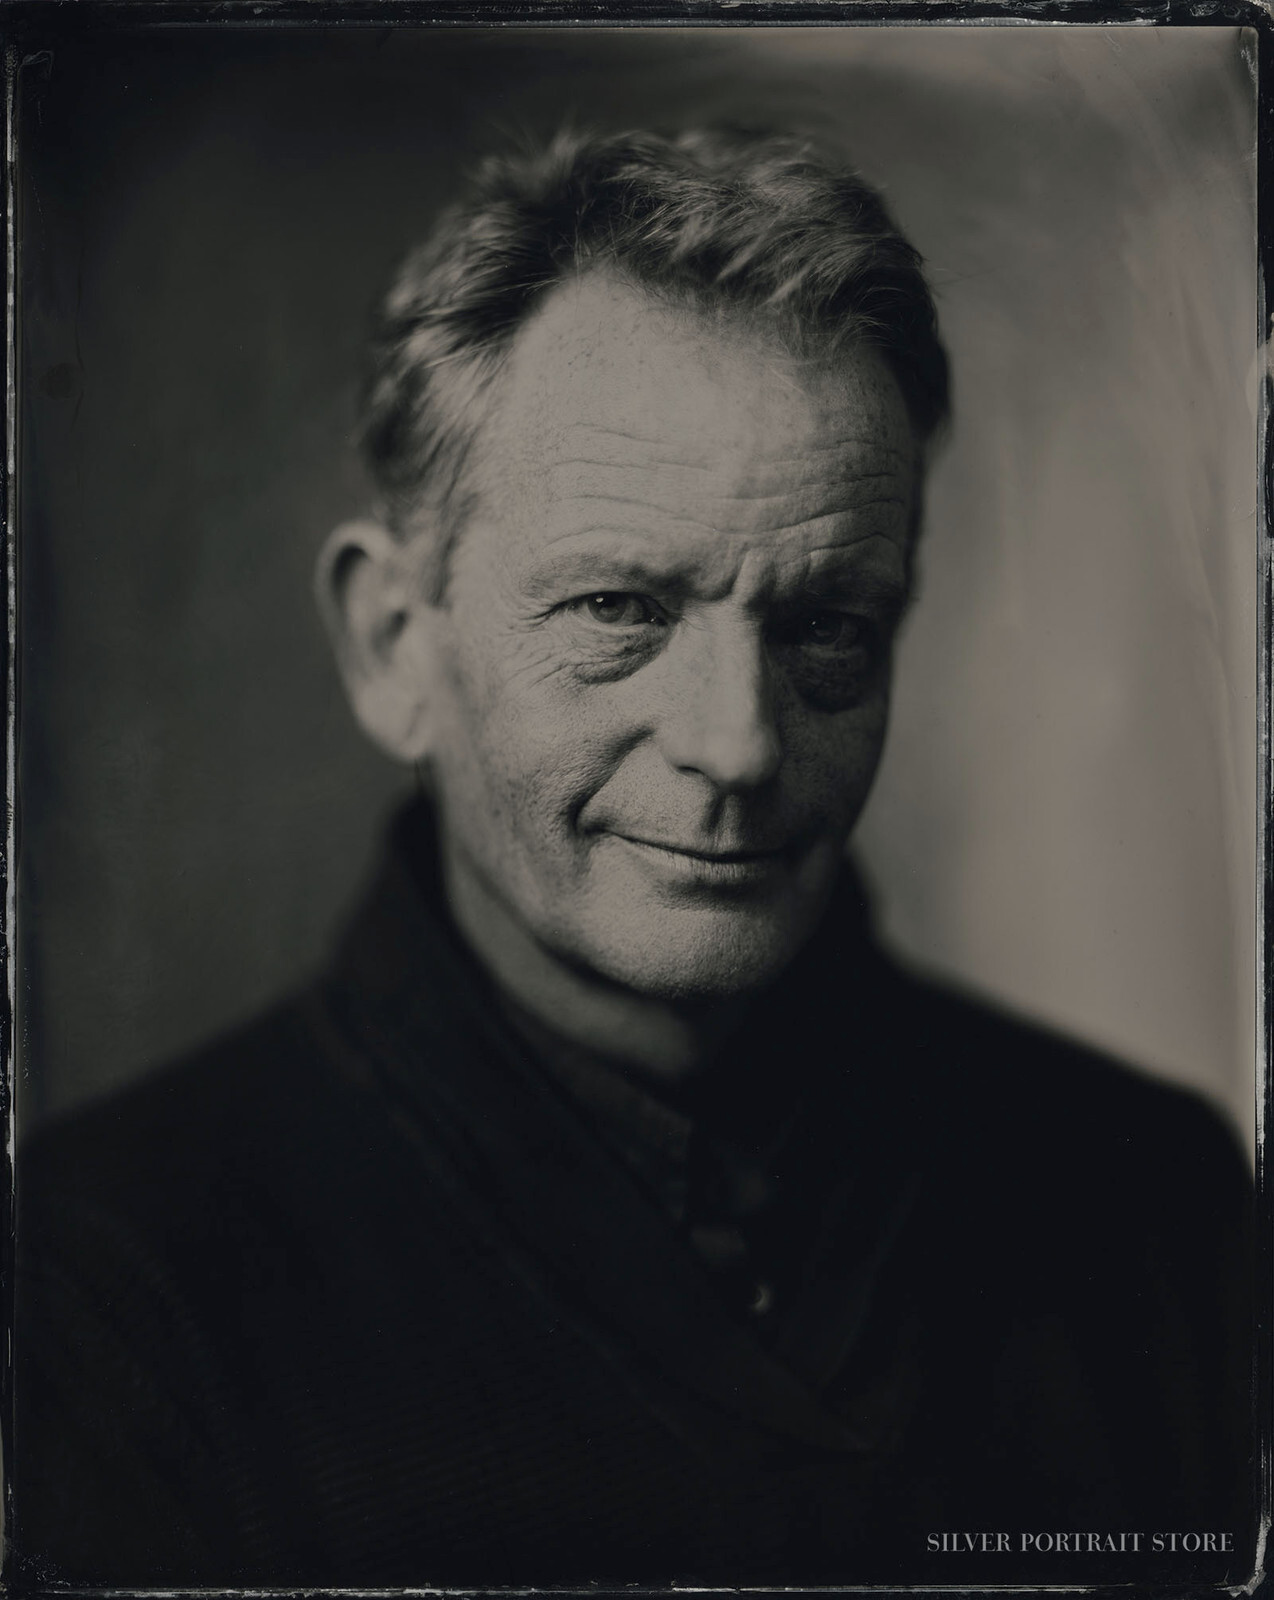 Rob-Silver Portrait Store-scan from Wet plate collodion-Tintype 20 x 25 cm.